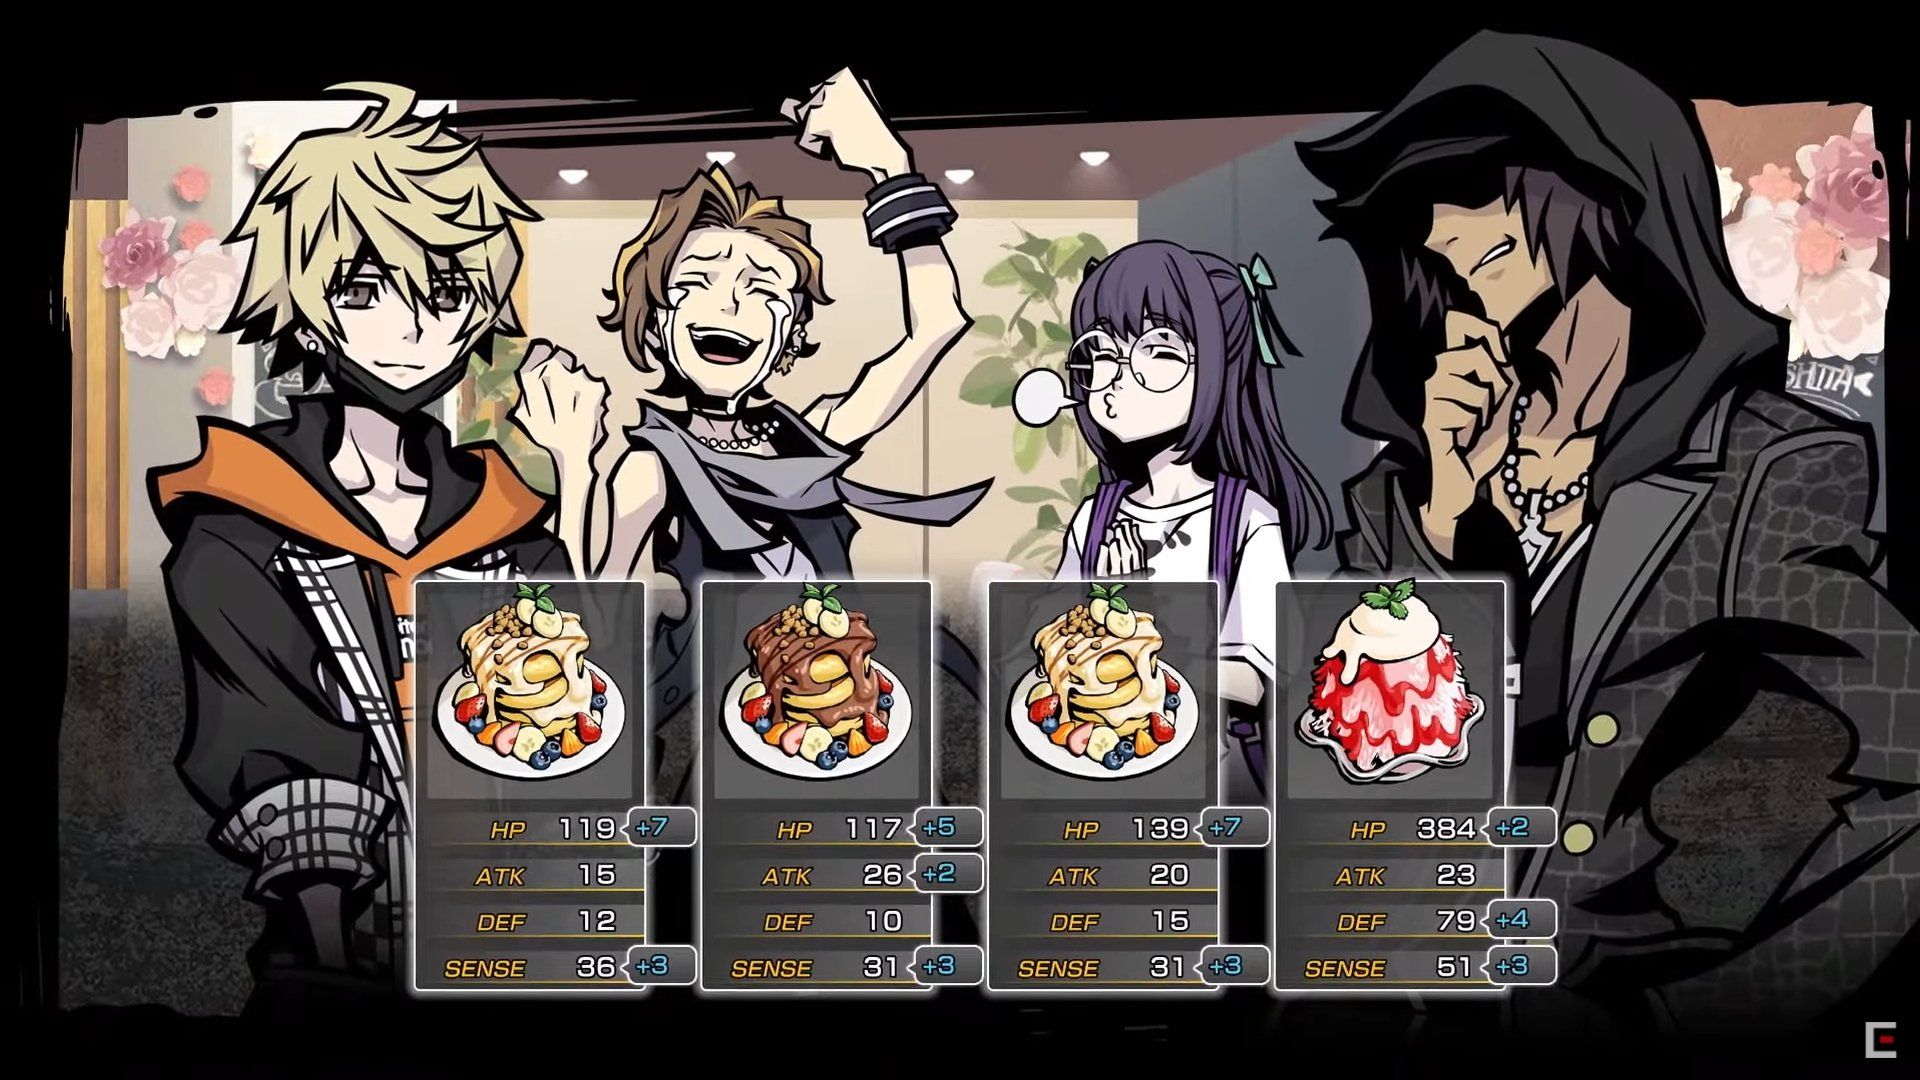 Neo The World Ends With You Demo Release Time, Gameplay Trailer, Update From Tetsuya Nomura